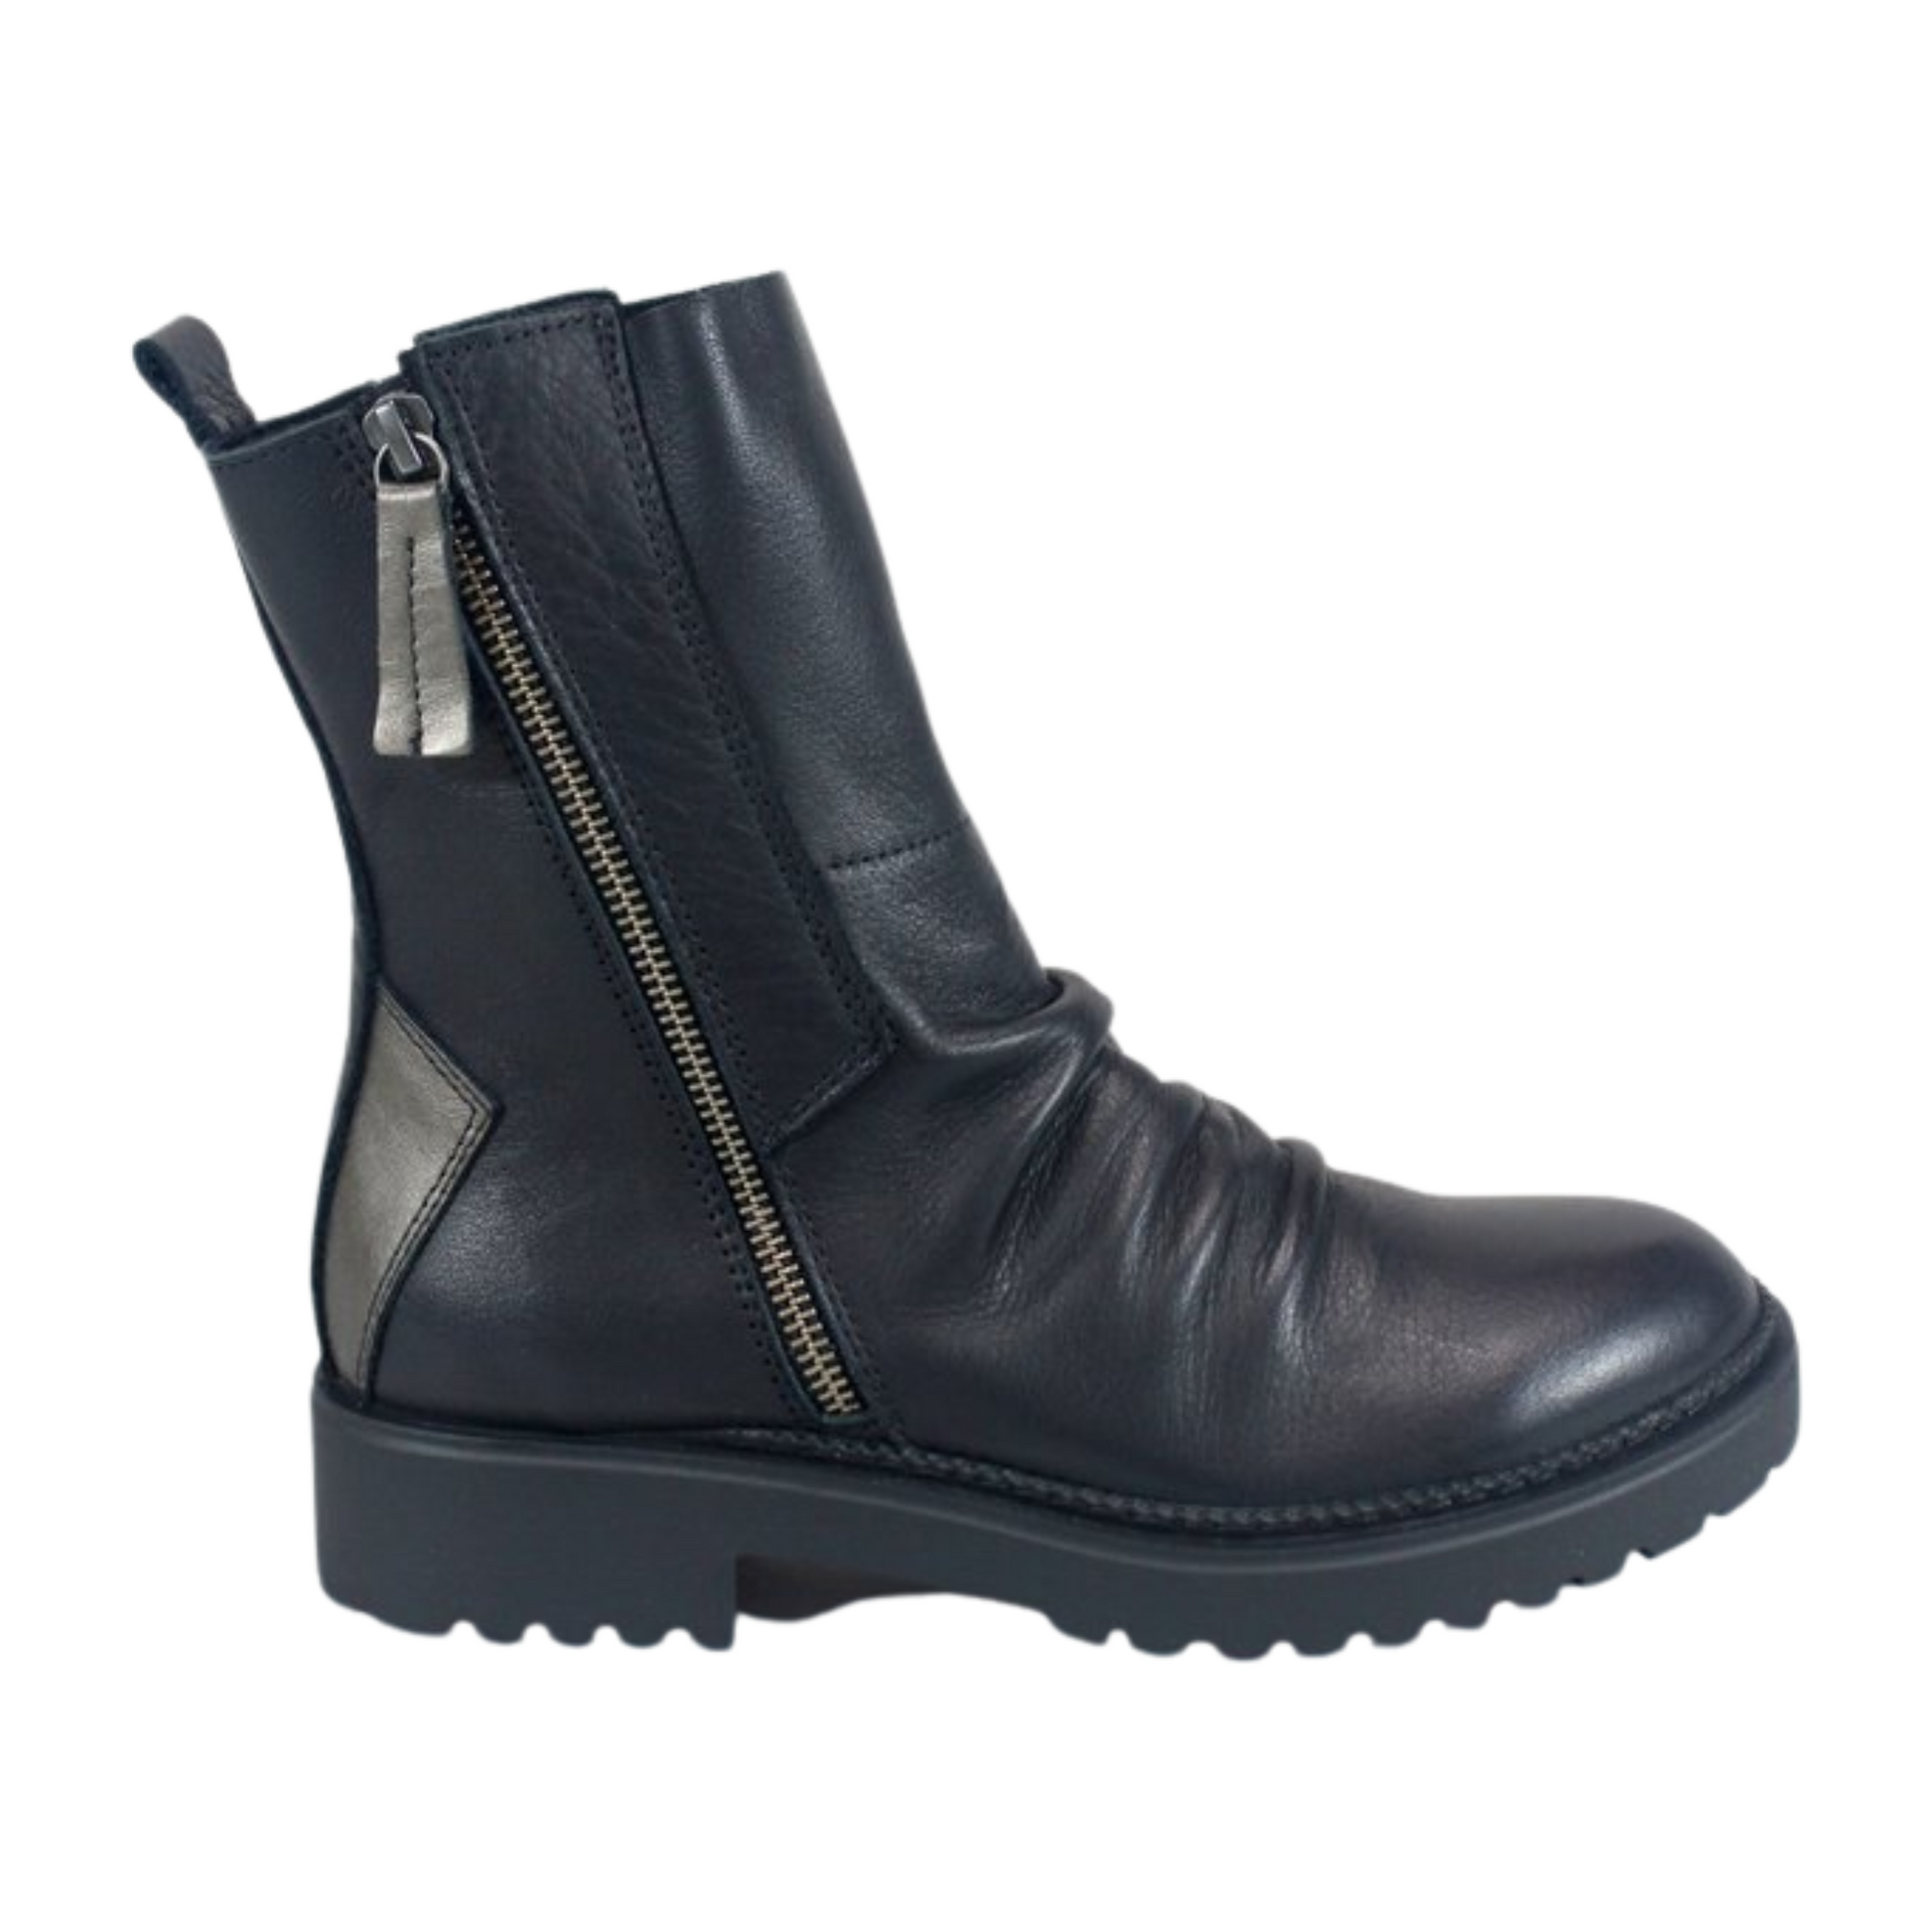 A black leather boot with ruched front and silver zipper is pictured in profile.